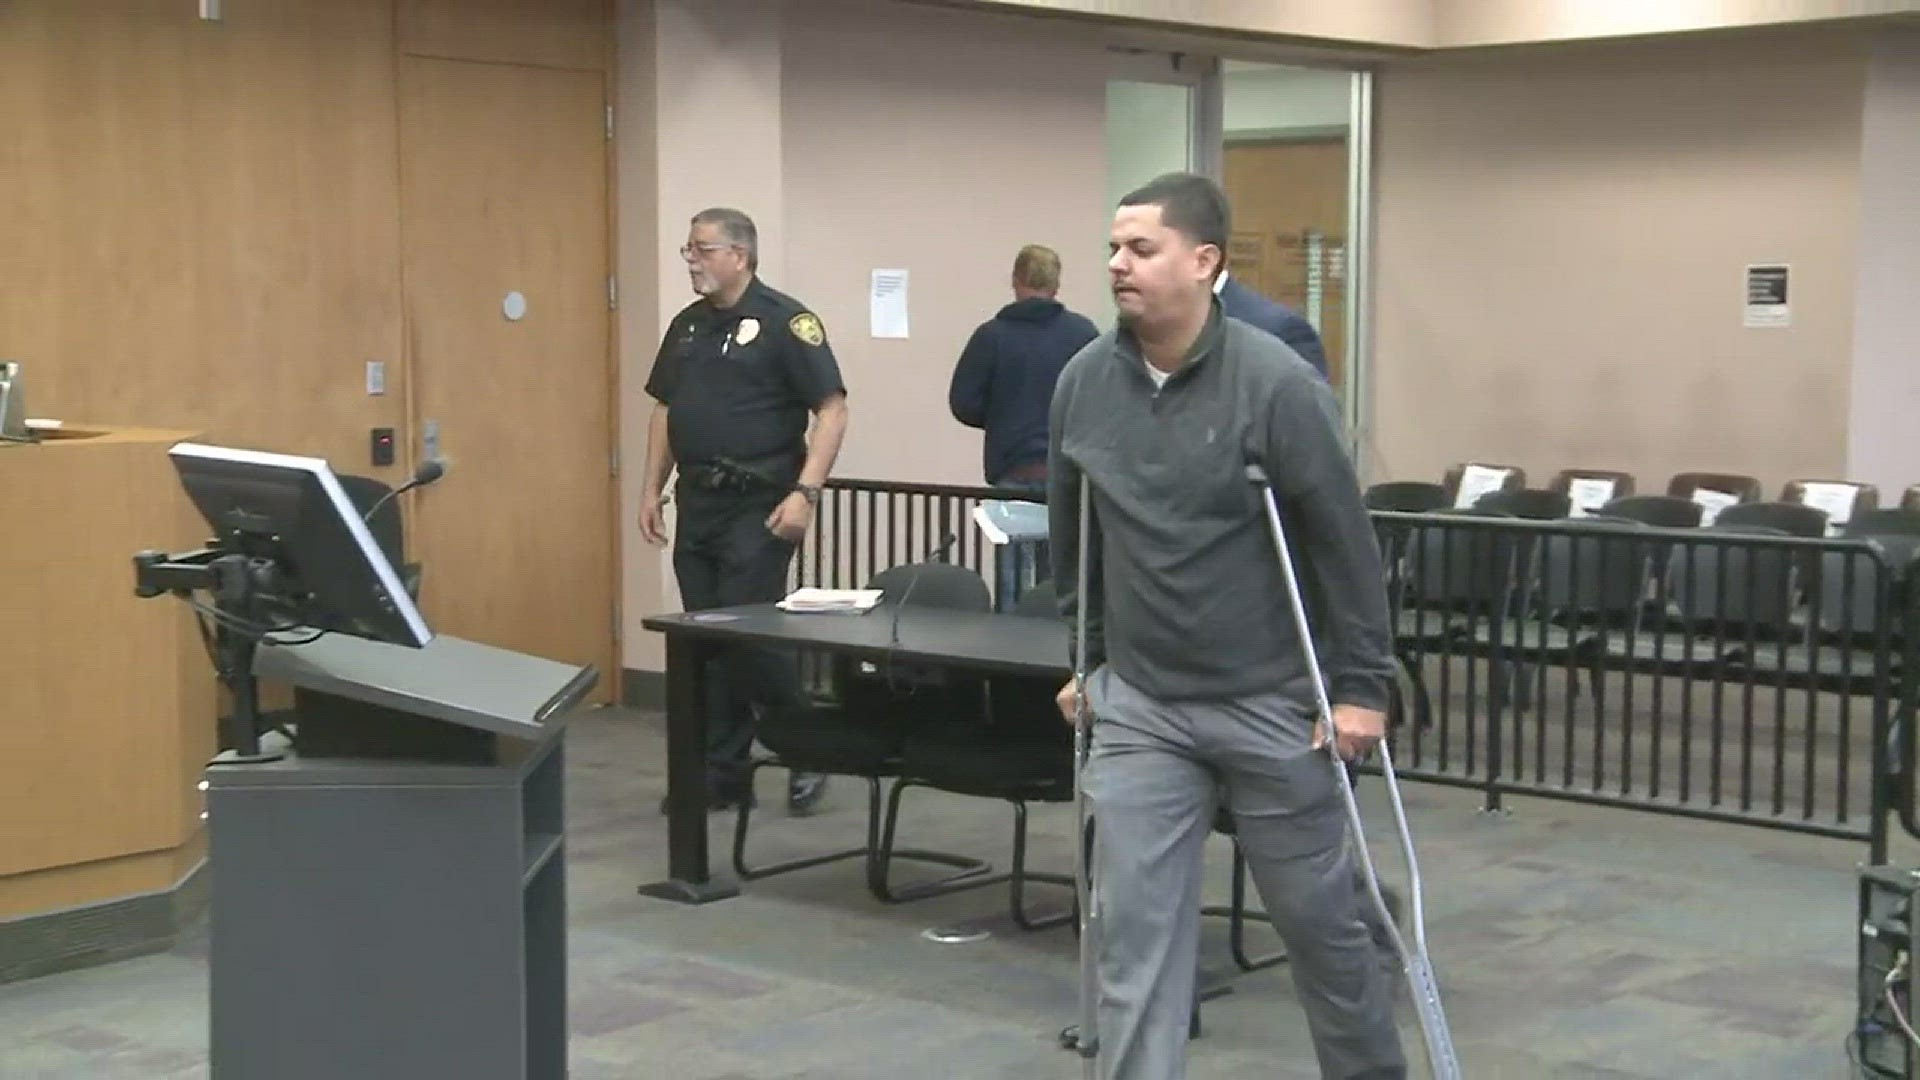 Dec. 5, 2017: Lorain City Councilman Angel Arroyo made his first court appearance Tuesday morning following his weekend arrest. Arroyo was in the courtroom on crutches for the brief hearing in which a not guilty plea.